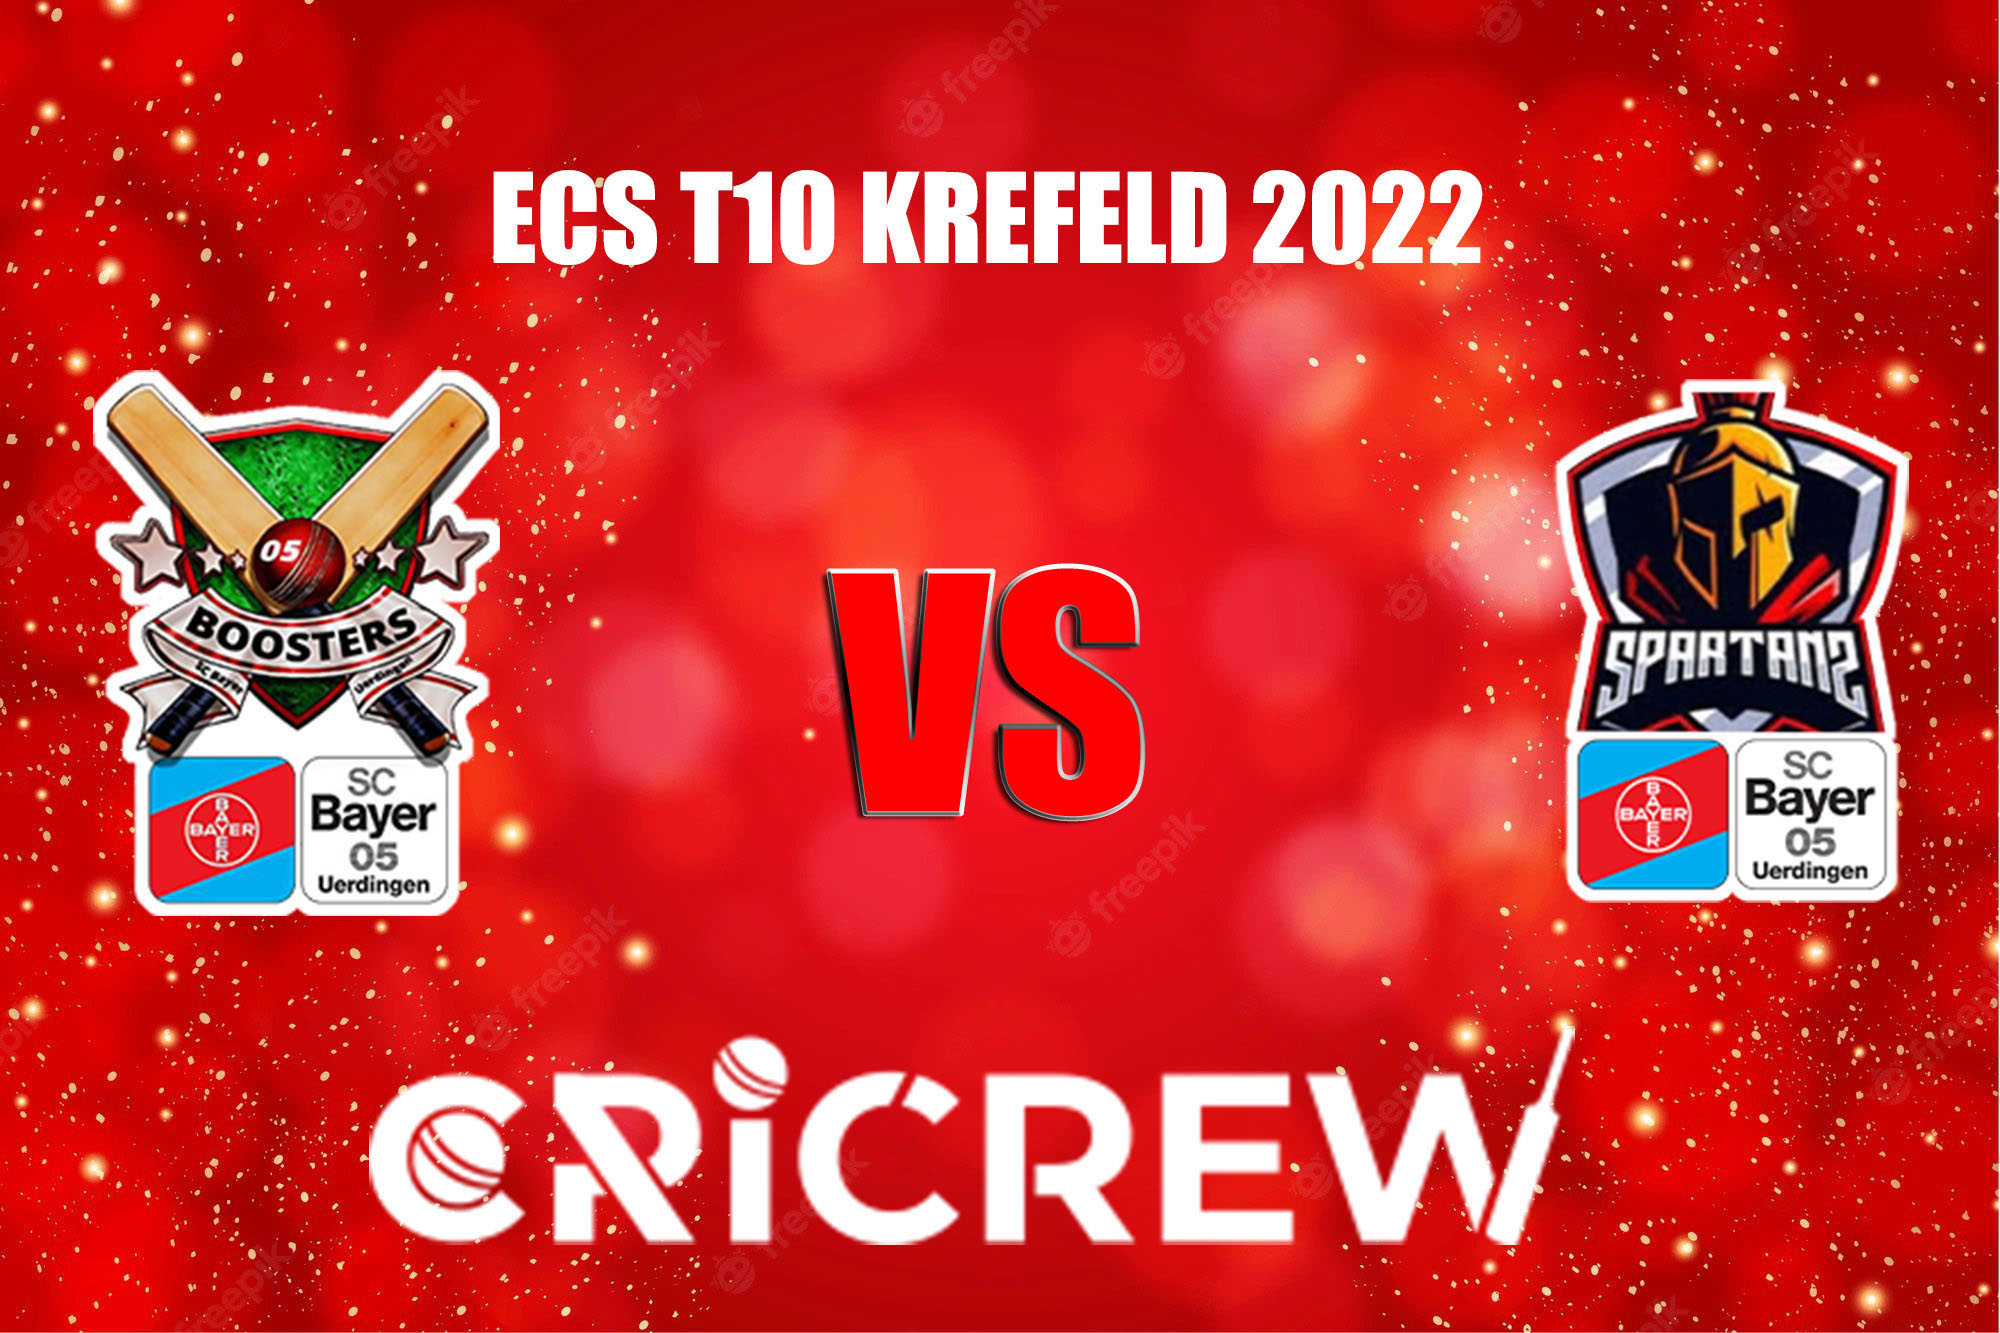 DB vs KCH Live Score starts on 26th August, at 06:00 PM at Bayer Uerdingen Cricket Ground, Krefeld. Here on www.cricrew.com you can find all Live, Upcoming and .